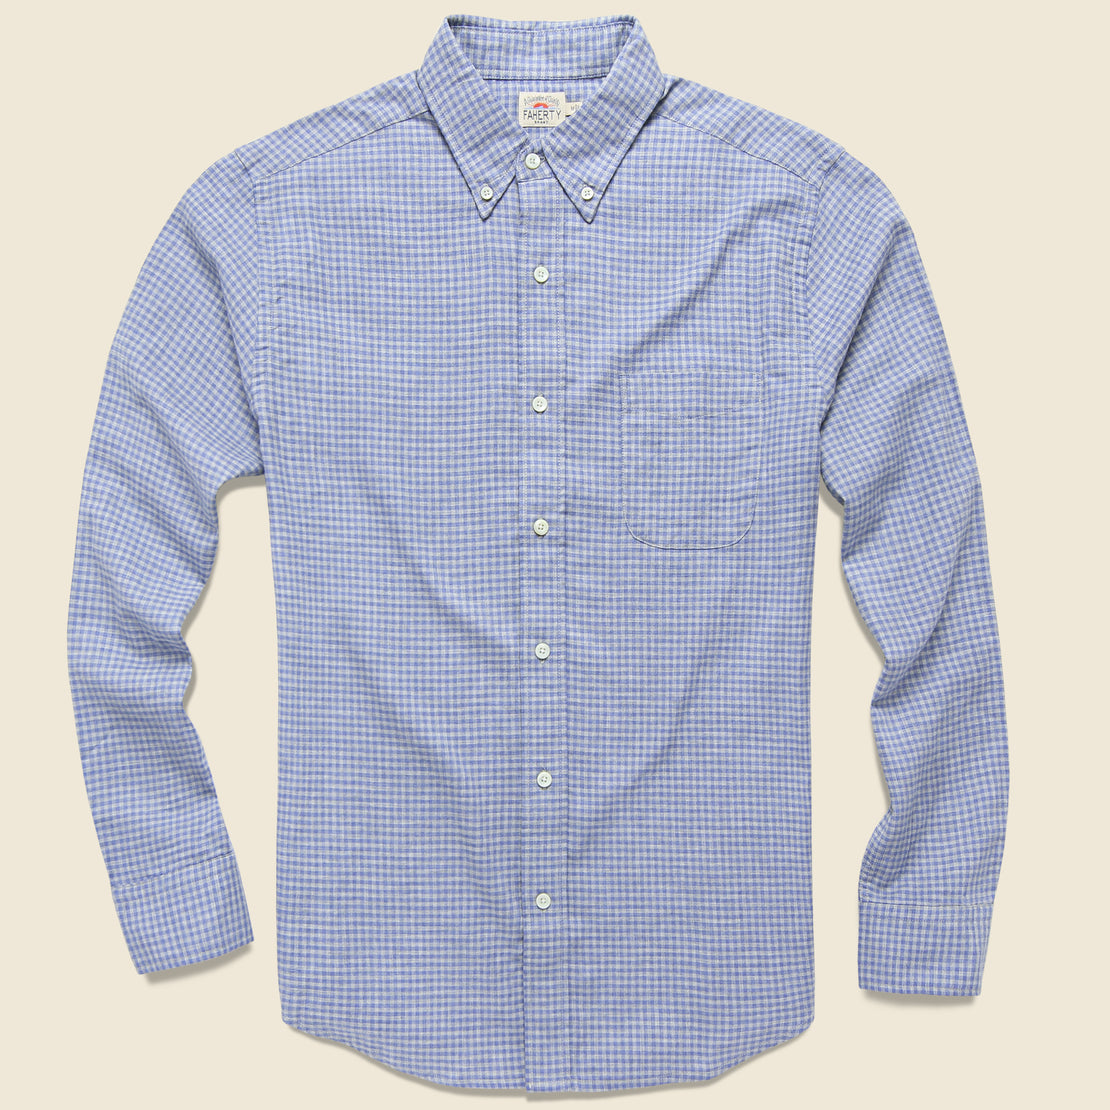 Faherty Pacific Shirt - Blue Grey Gingham